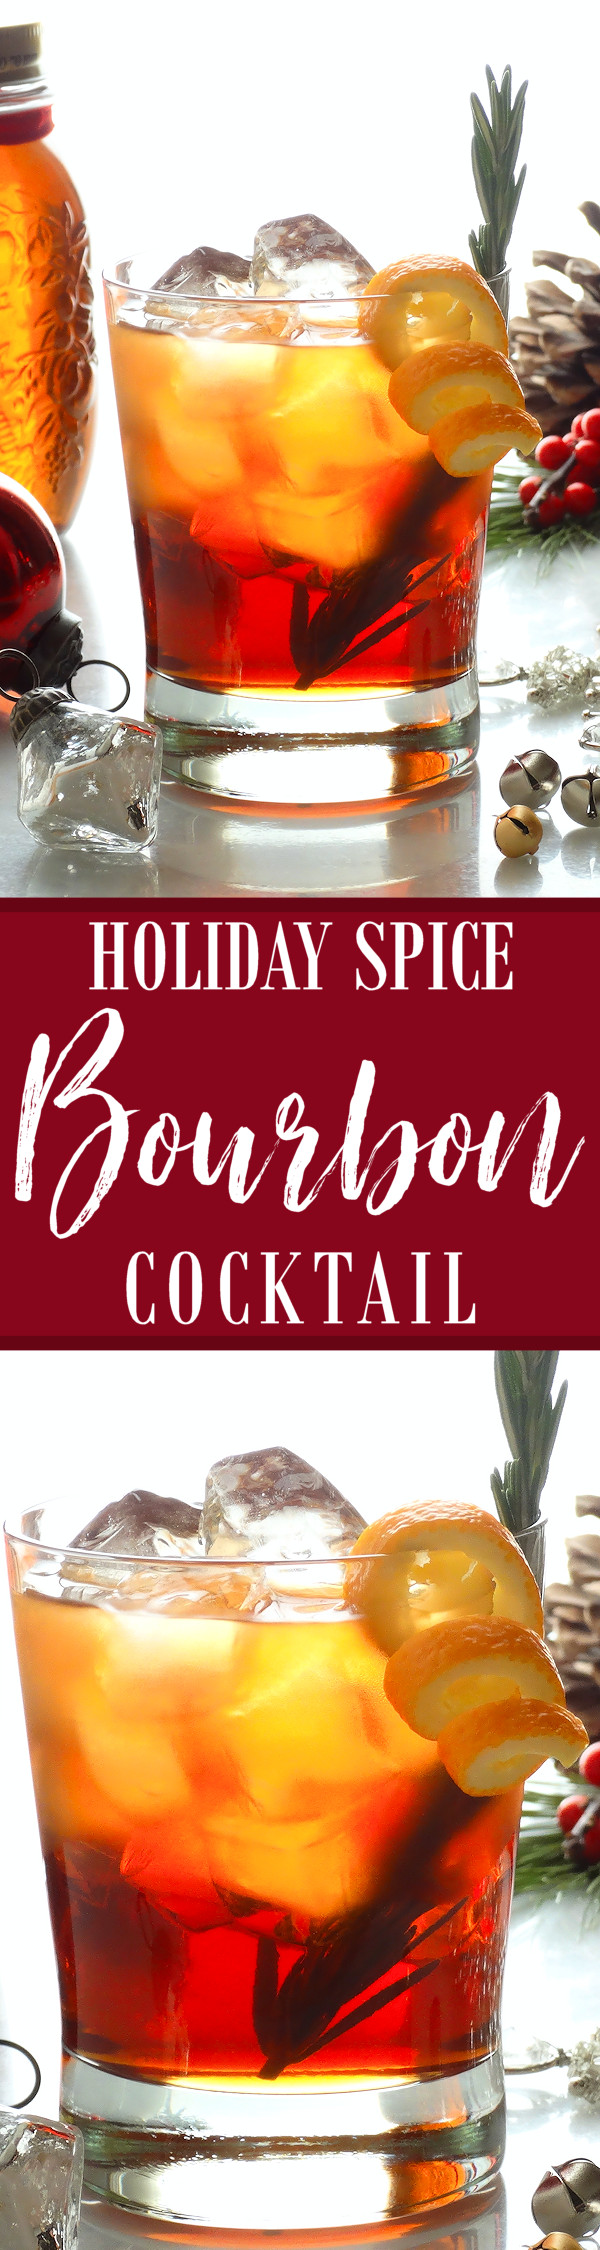 The 21 Best Ideas for Bourbon Christmas Drinks - Most Popular Ideas of All Time